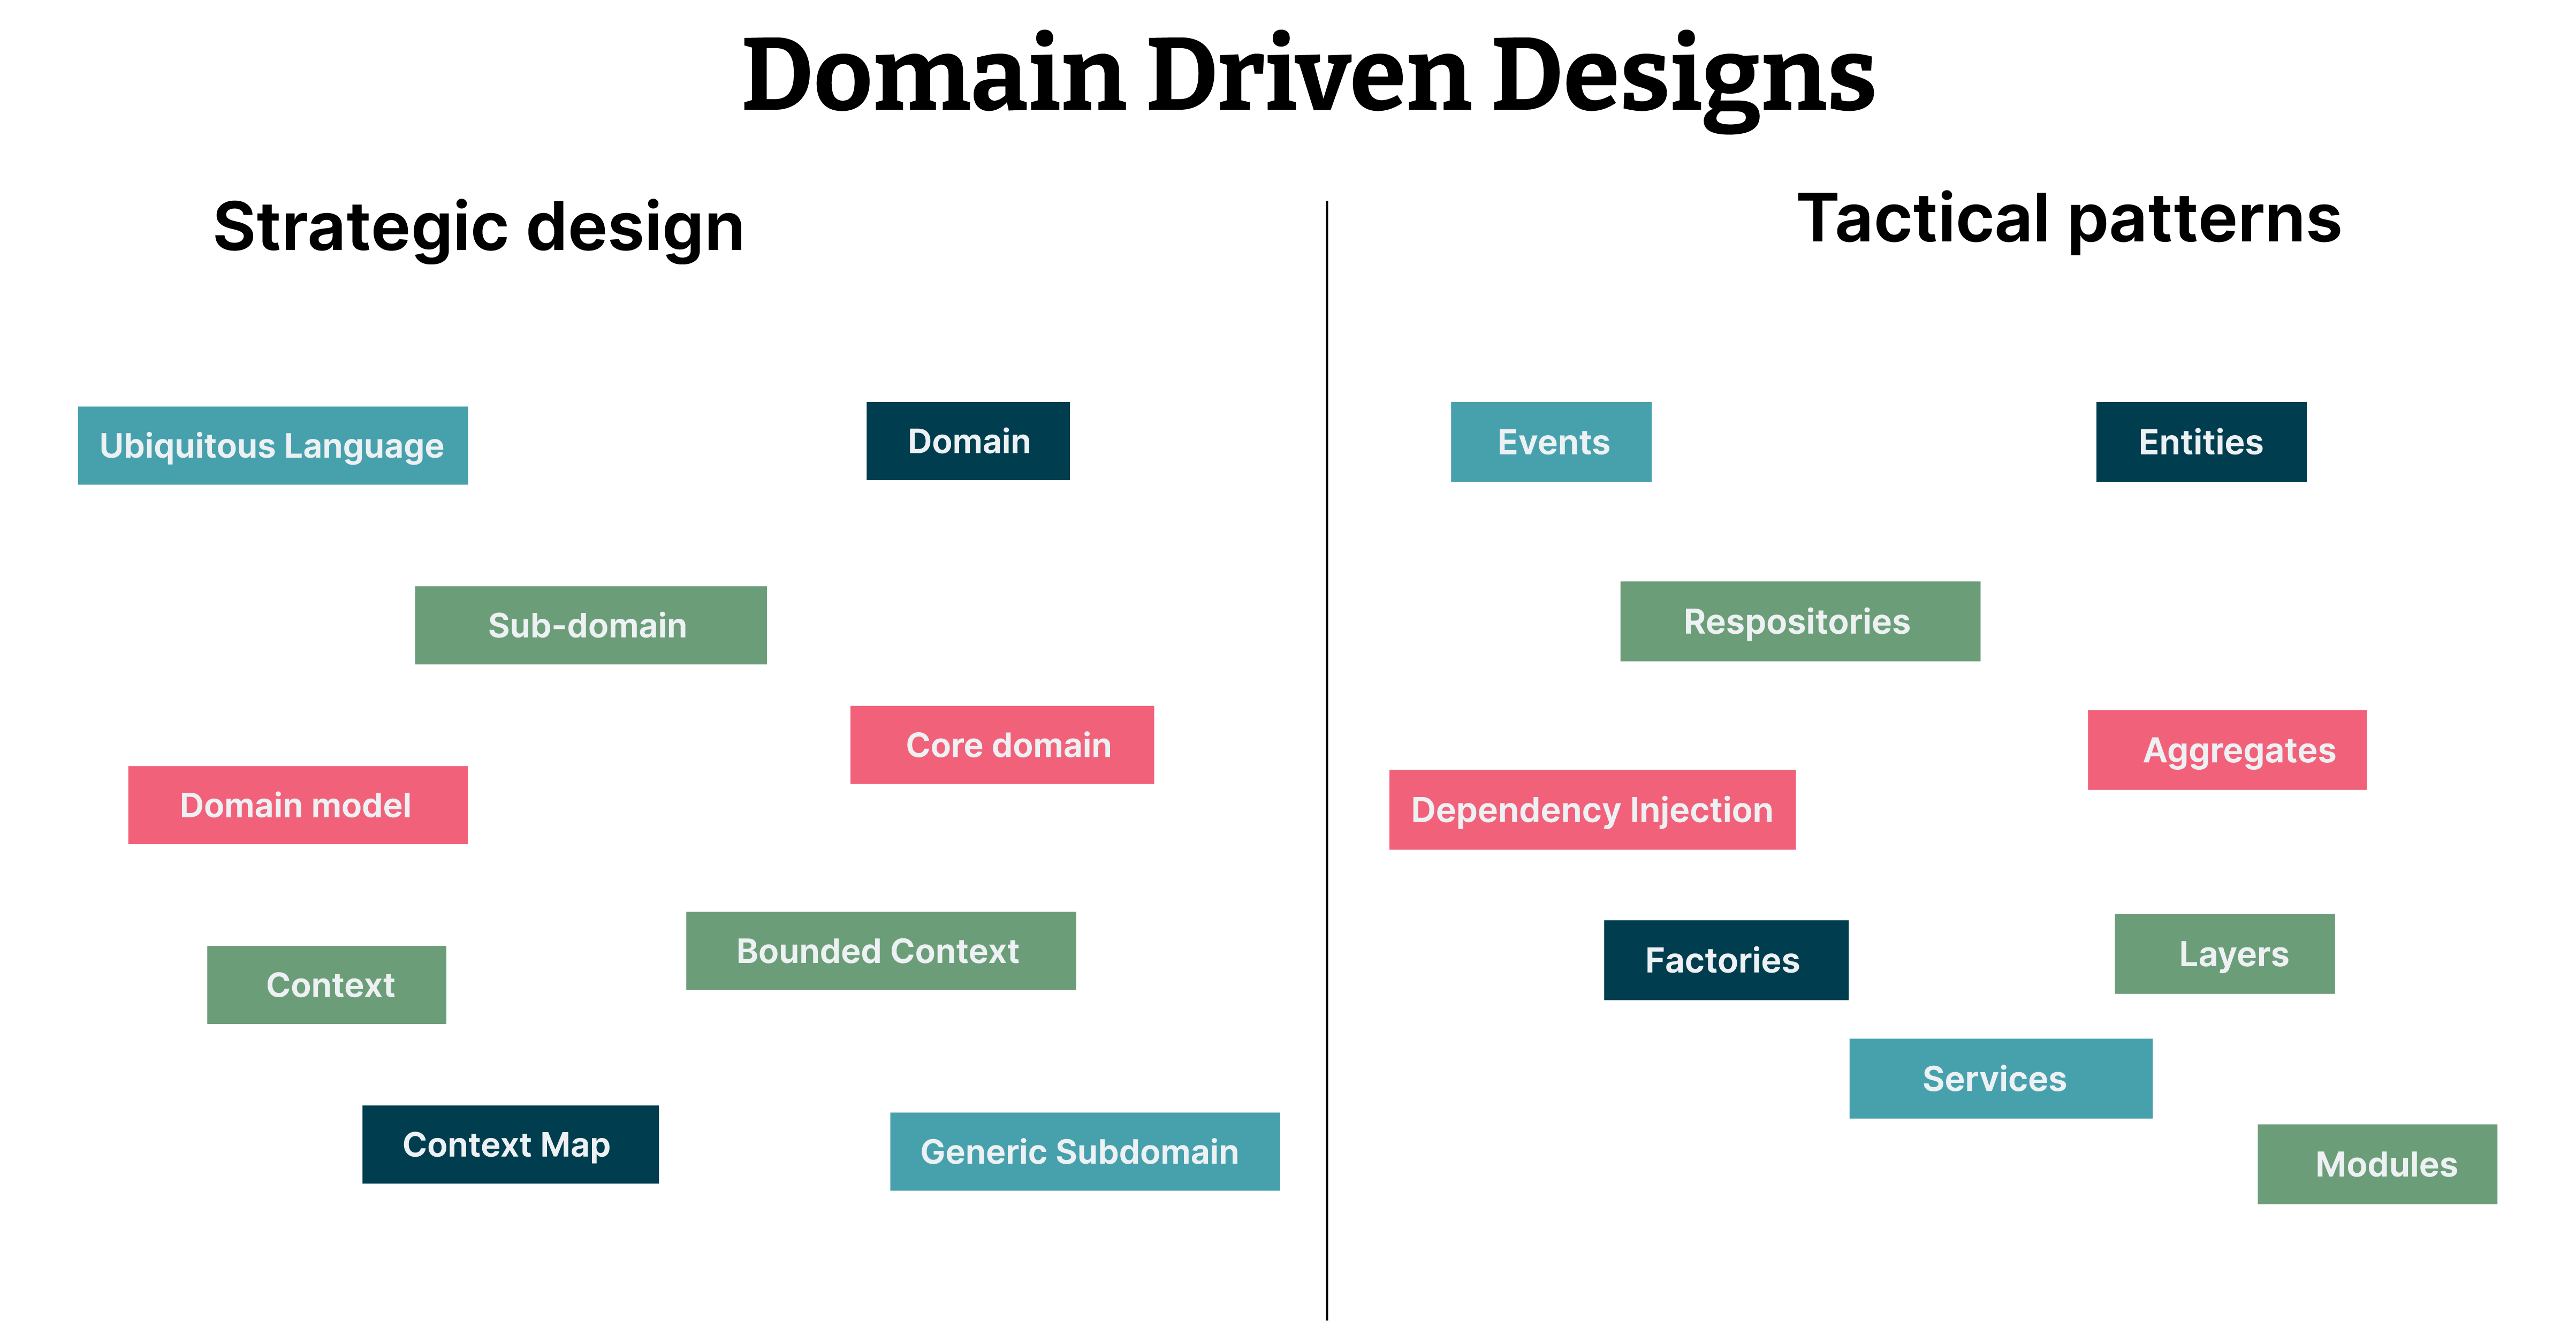 Illustration on Domain driven design shows strategic design such as domain, sub-domain, ubiquitous language, domain model, core domain, context, context map, bounded context, generic subdomain and tactical patterns, such as events, entities, repositories, aggregates, dependency injection, layers, factories, services, modules 